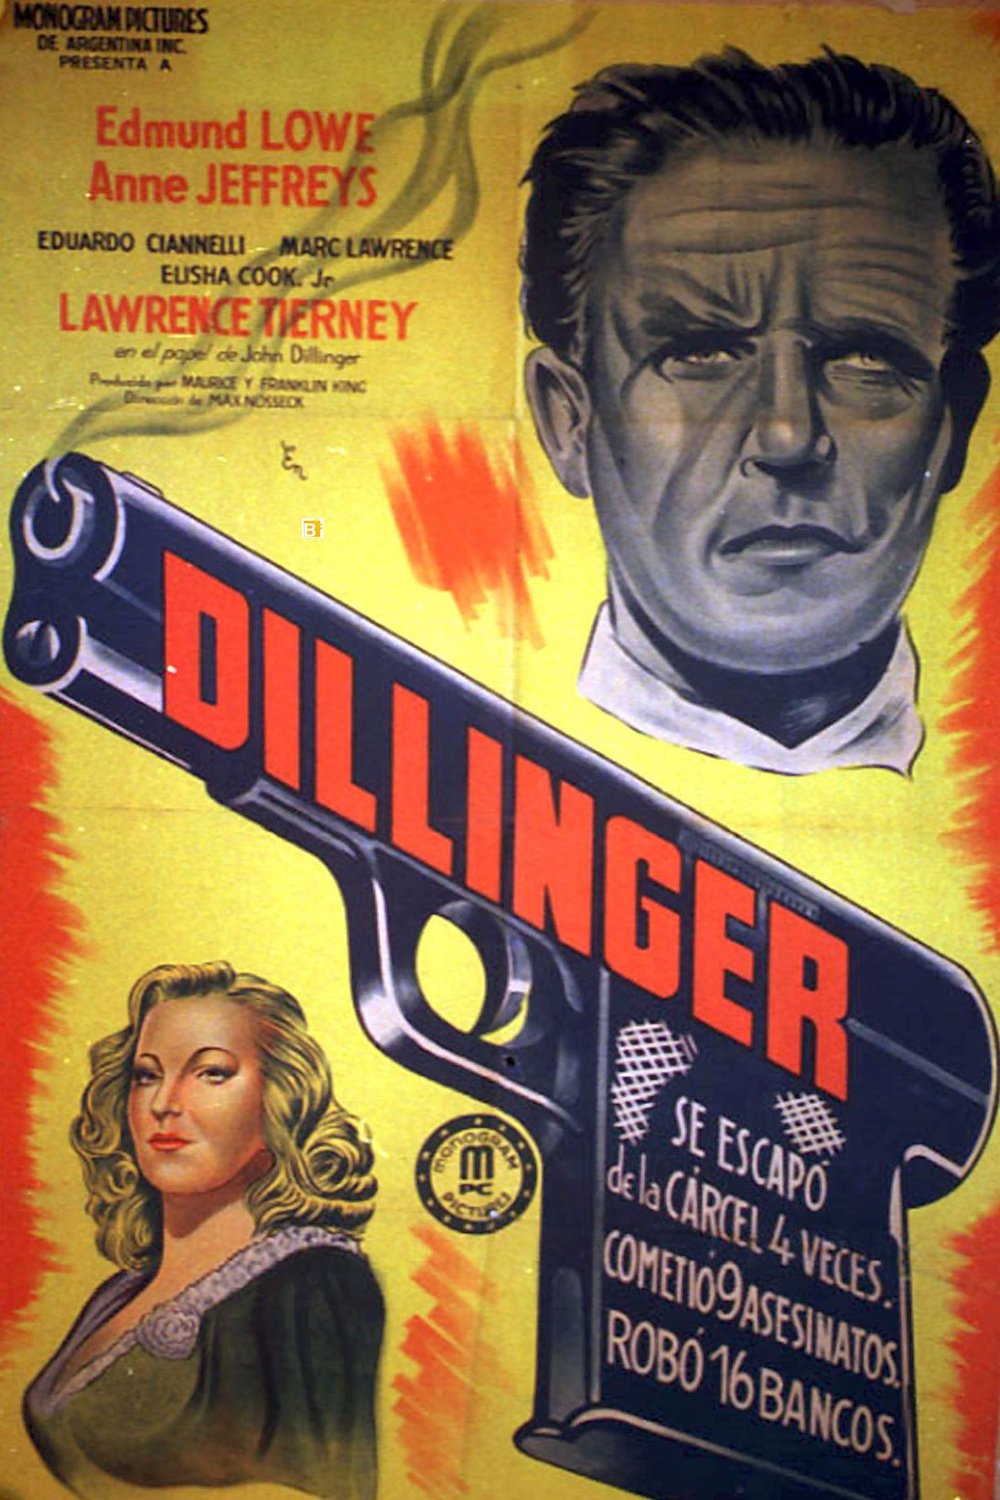 Poster of the movie Dillinger